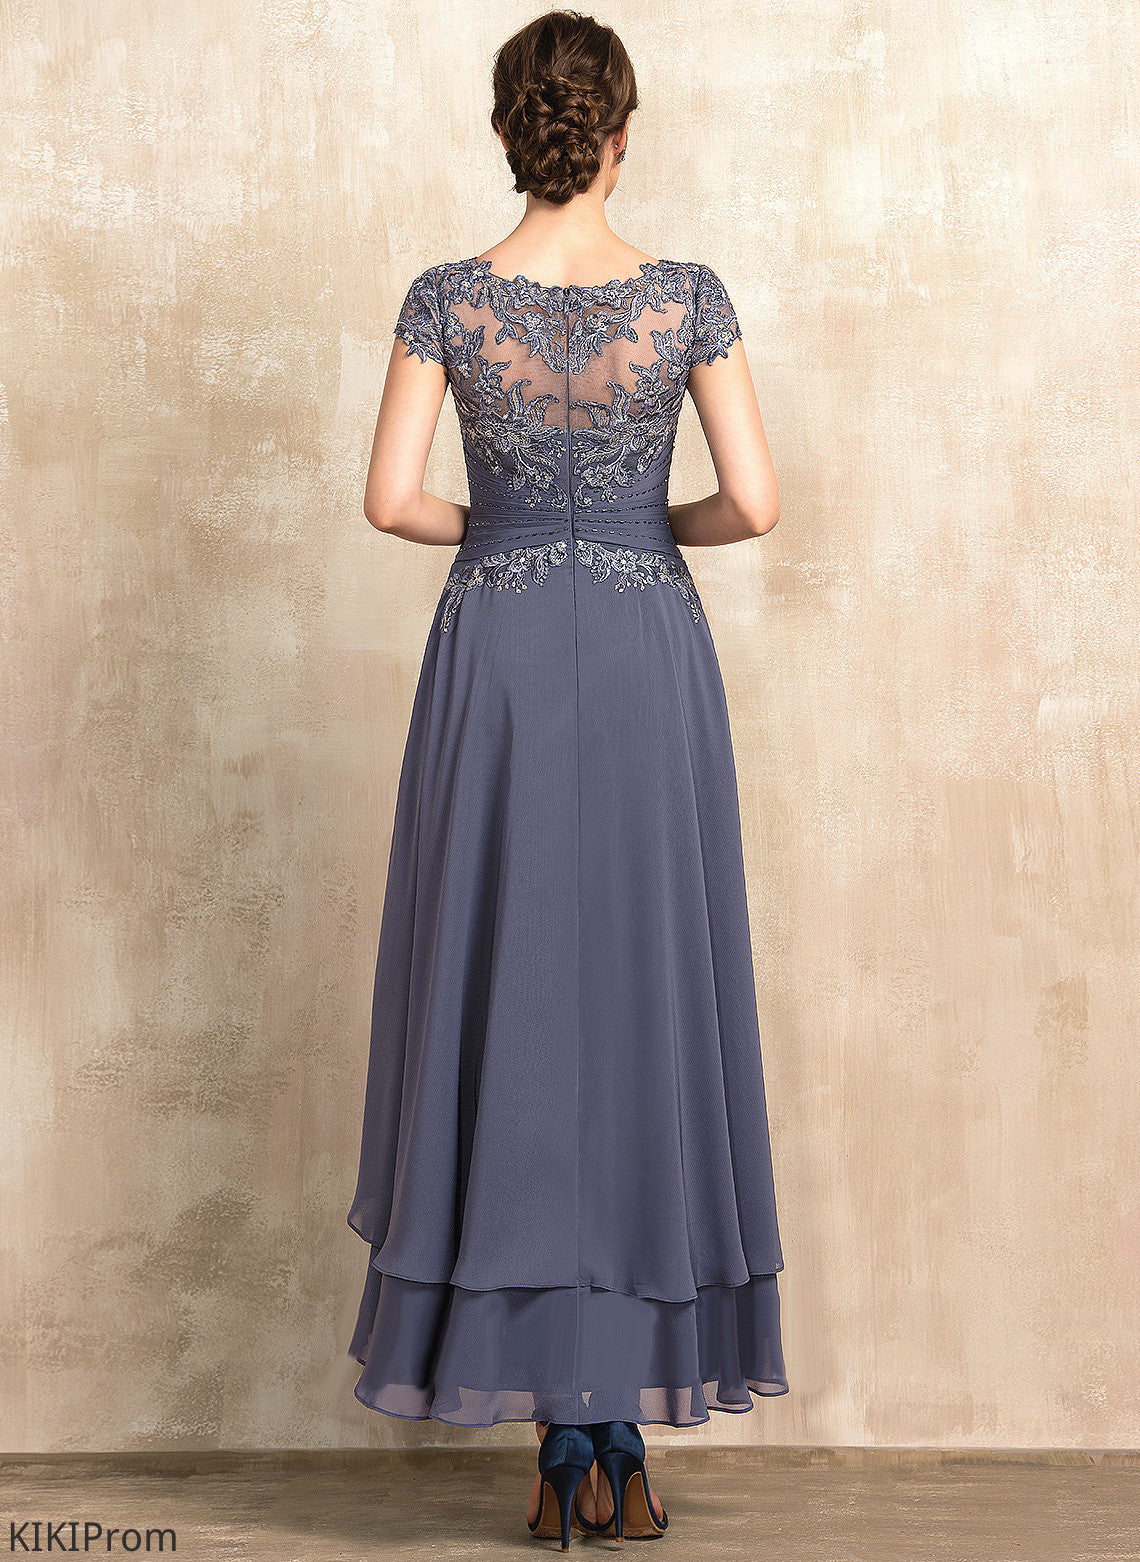 Asymmetrical Cocktail Cocktail Dresses Beading Neck Aurora Lace A-Line Scoop Chiffon Dress With